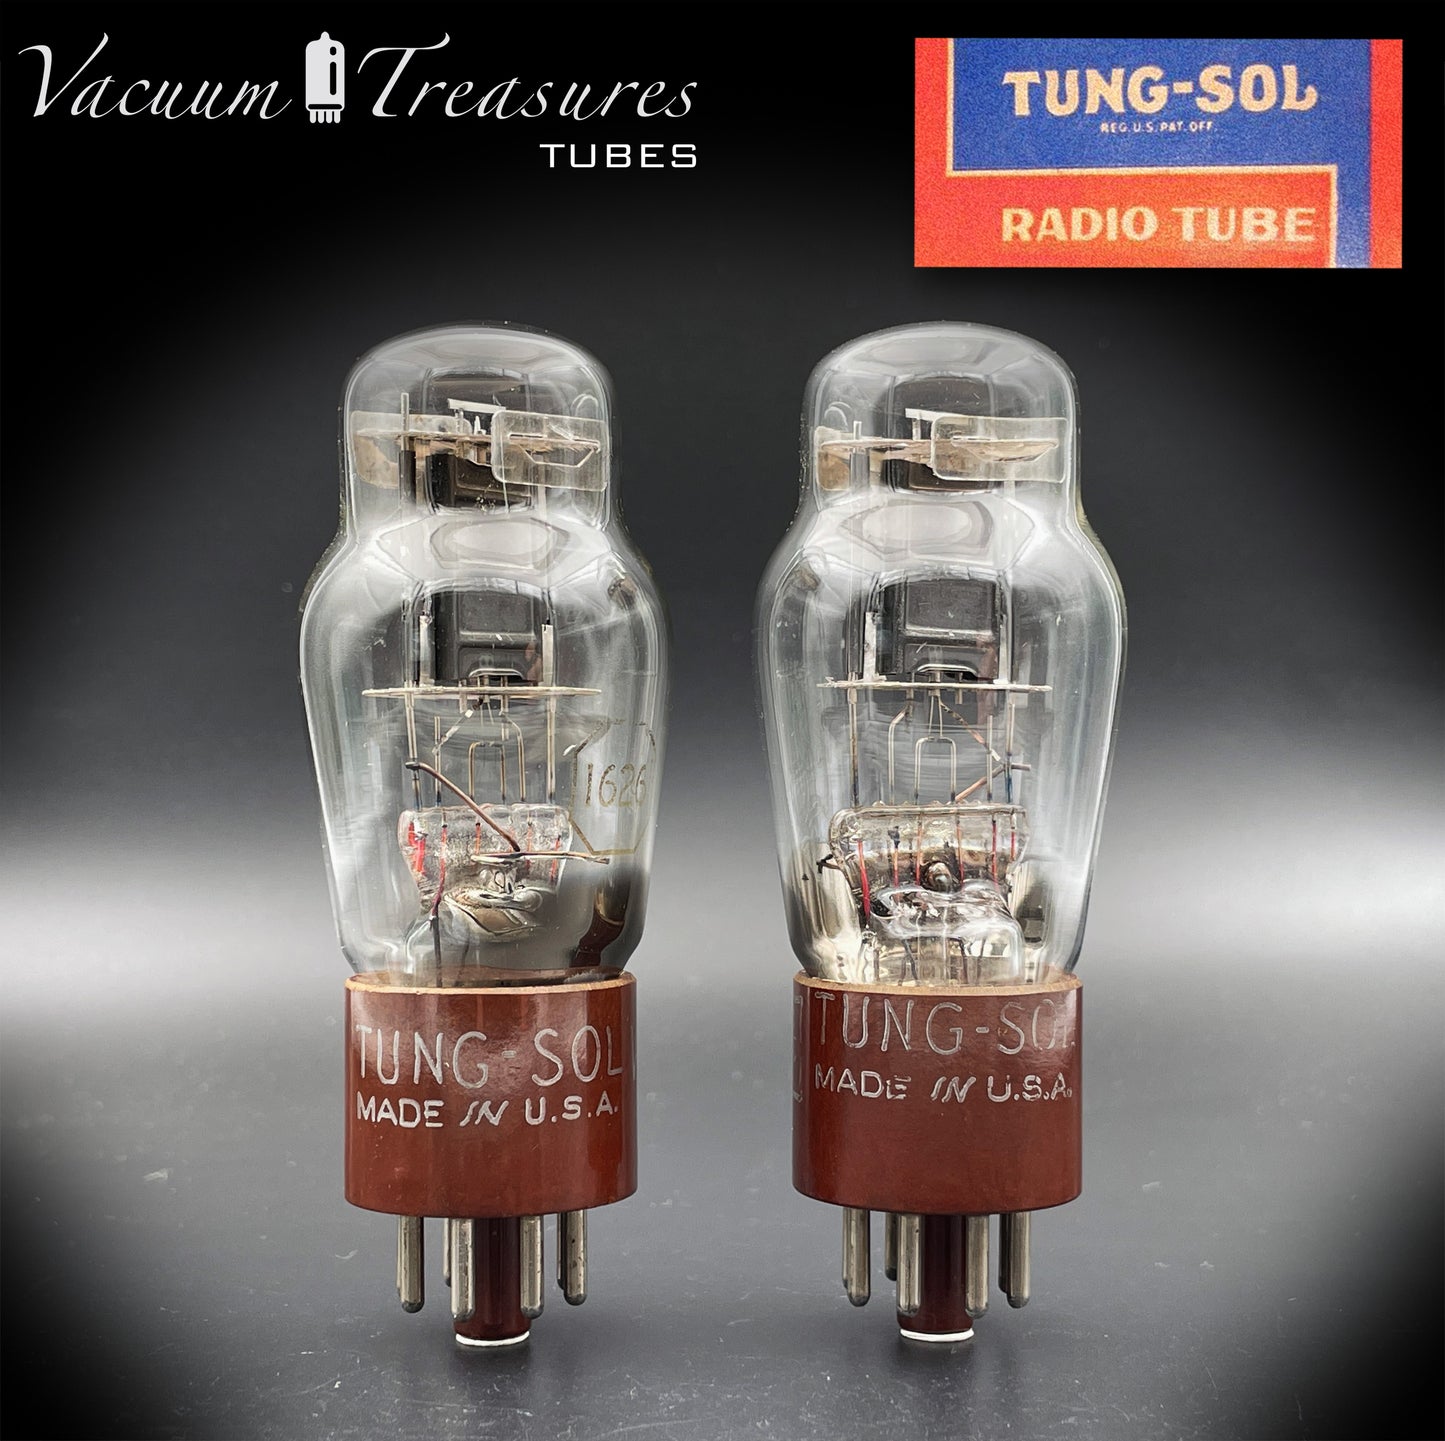 1626 ( VT-137 ) TUNG-SOL NOS ダーリンアンプマッチドペア用パワー三極管 MADE IN USA